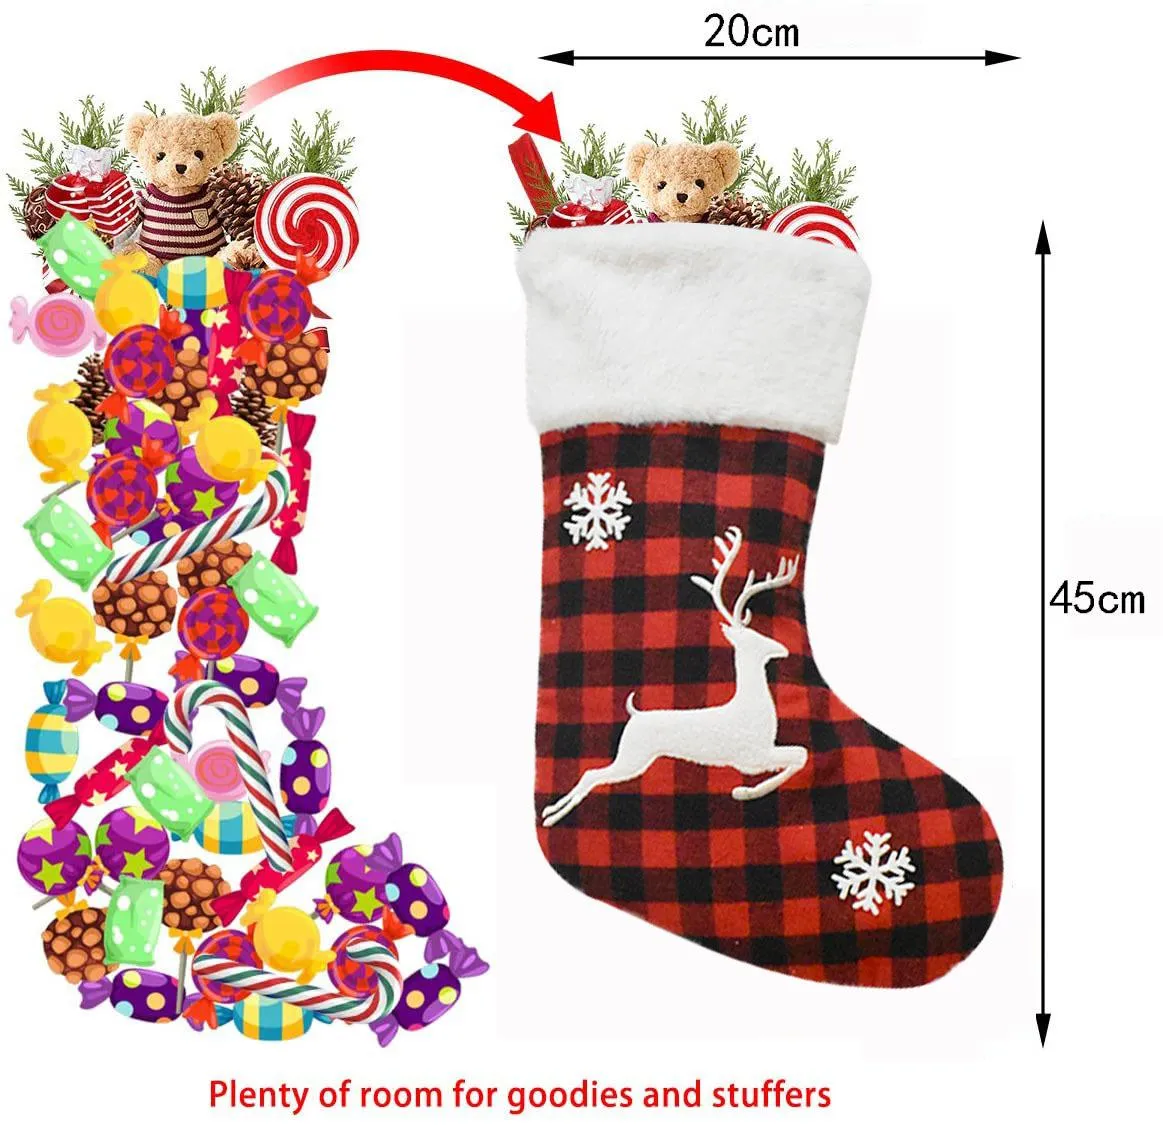 Large Size Red Grid Christmas Stocking Gift Bags For Kids Christmas Tree Ornament Xmas Pendant Socks Home Party Decoration